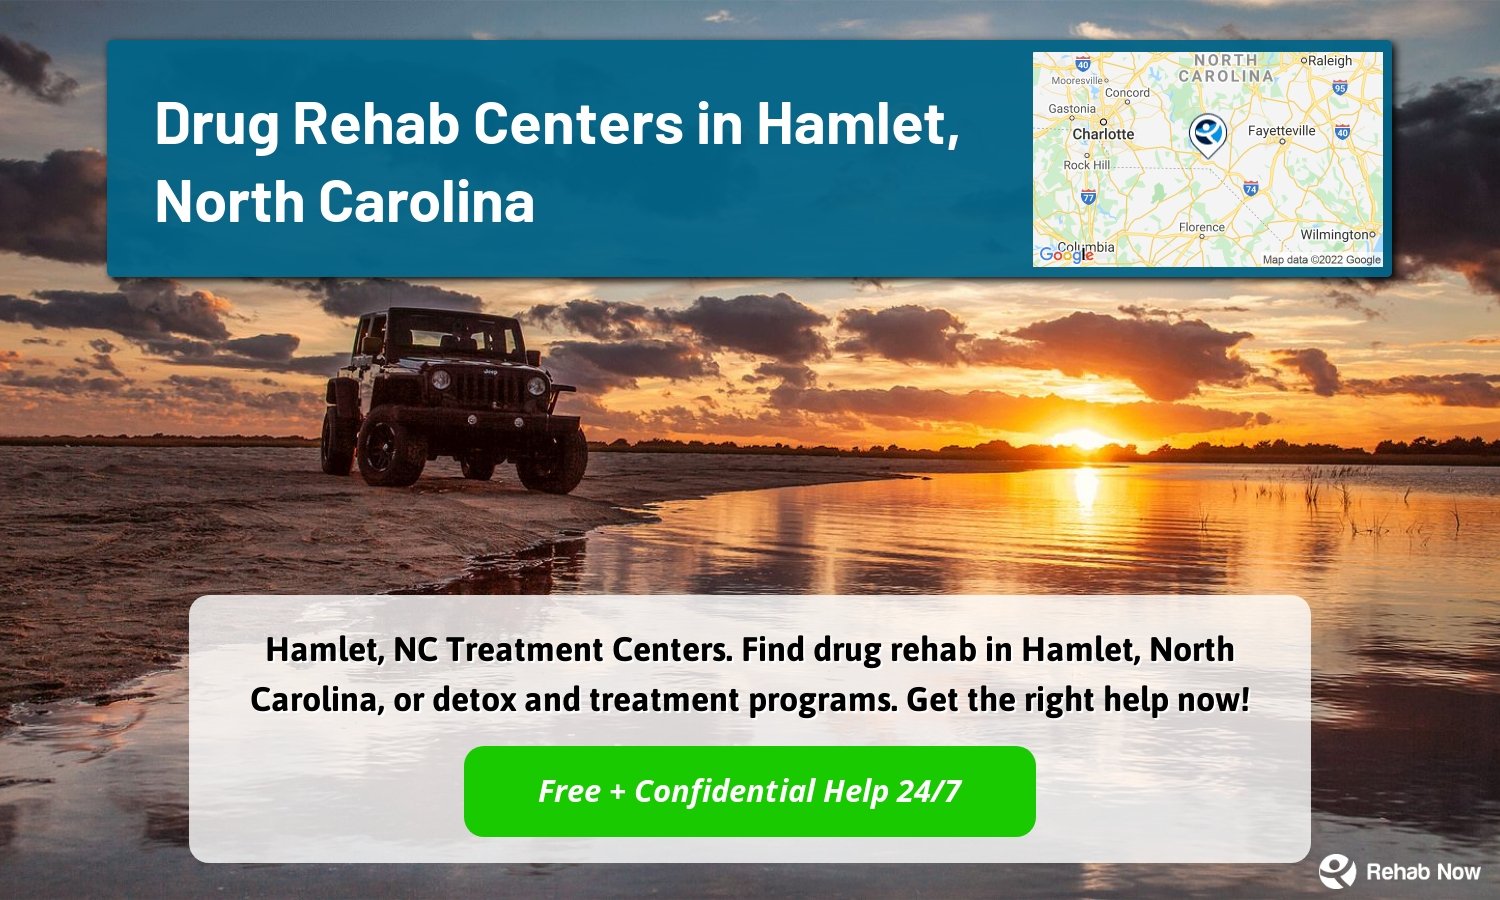 Hamlet, NC Treatment Centers. Find drug rehab in Hamlet, North Carolina, or detox and treatment programs. Get the right help now!